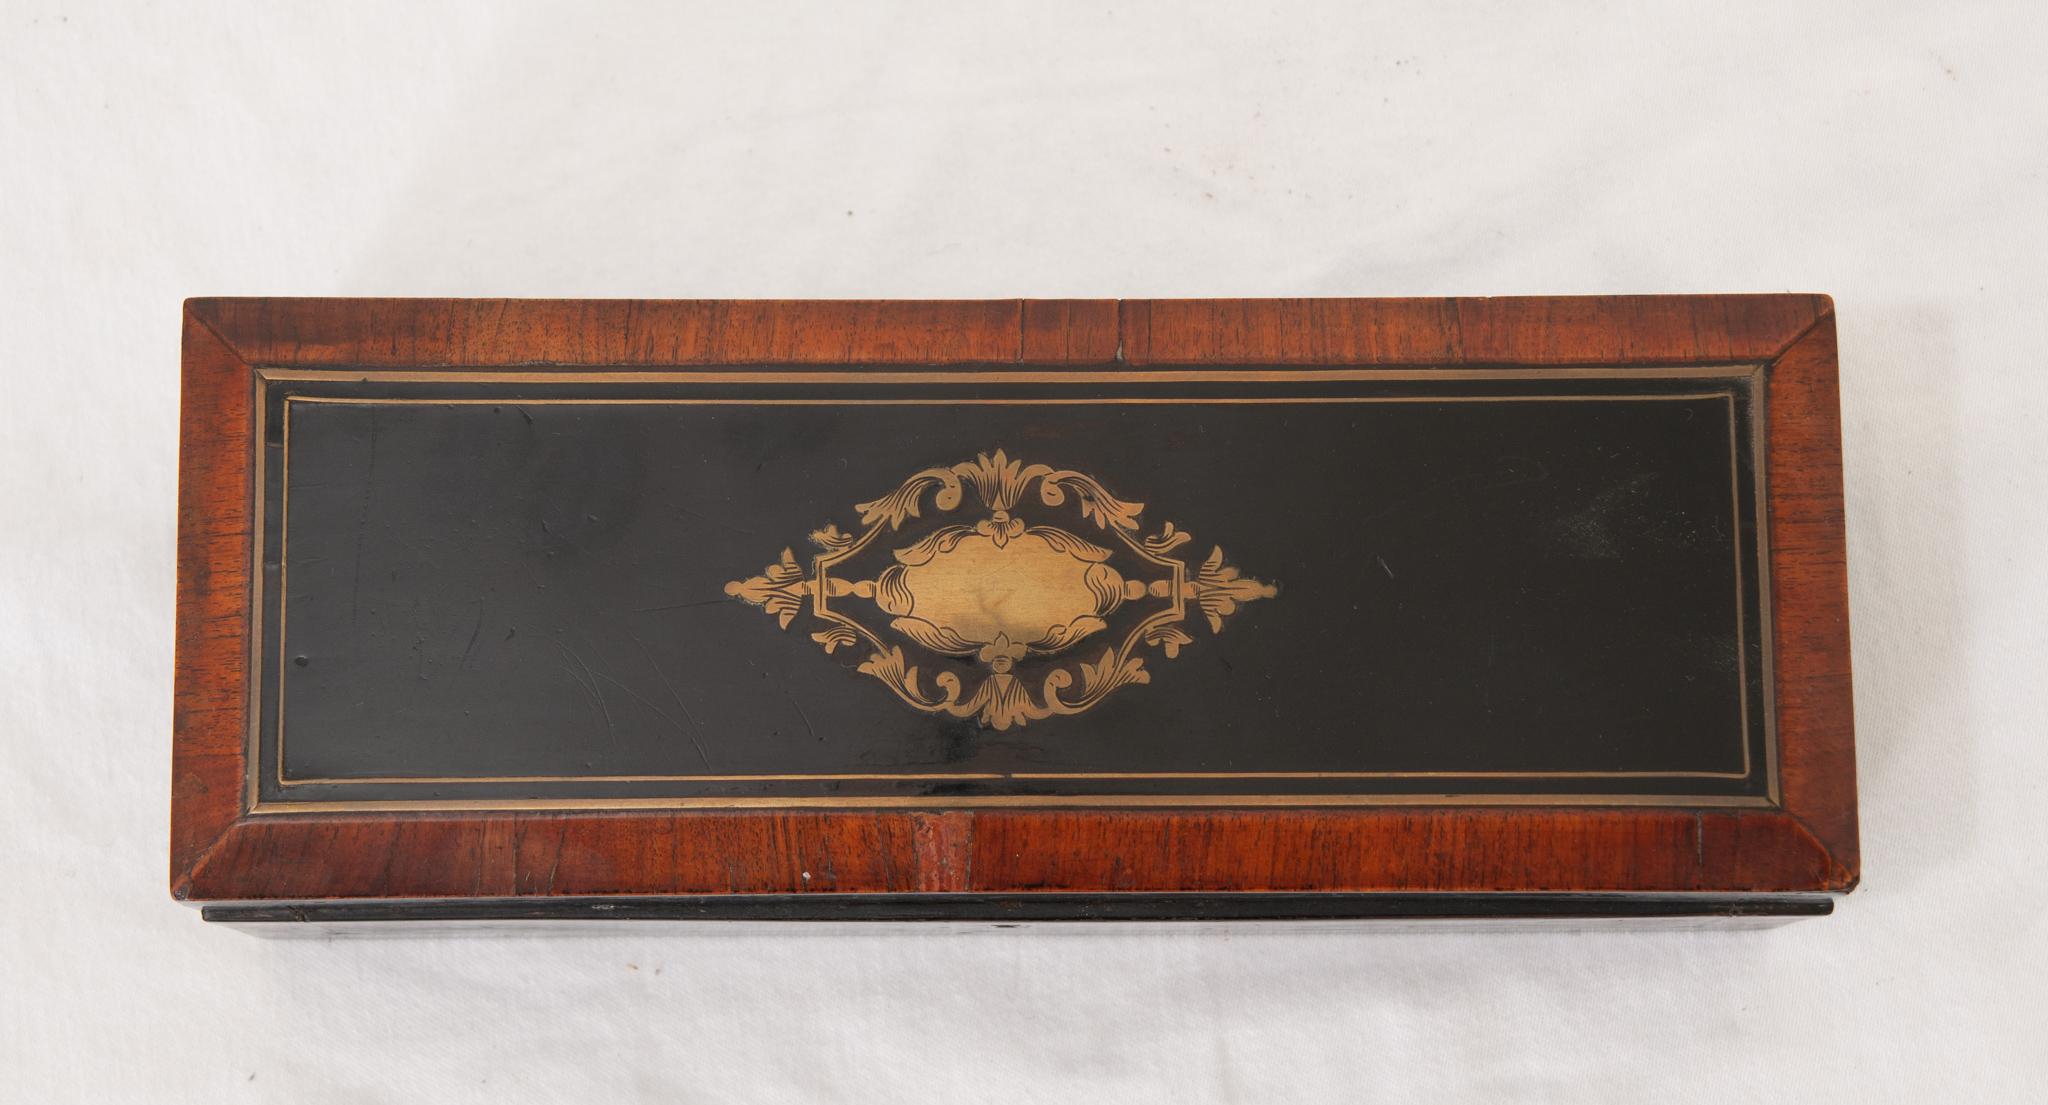 A 19th century glove box made in France from ebonized mahogany. This box has a fall front, allowing easy access to the contents inside, including a silk-lined interior. Be sure to view the detailed images to see the current condition of this